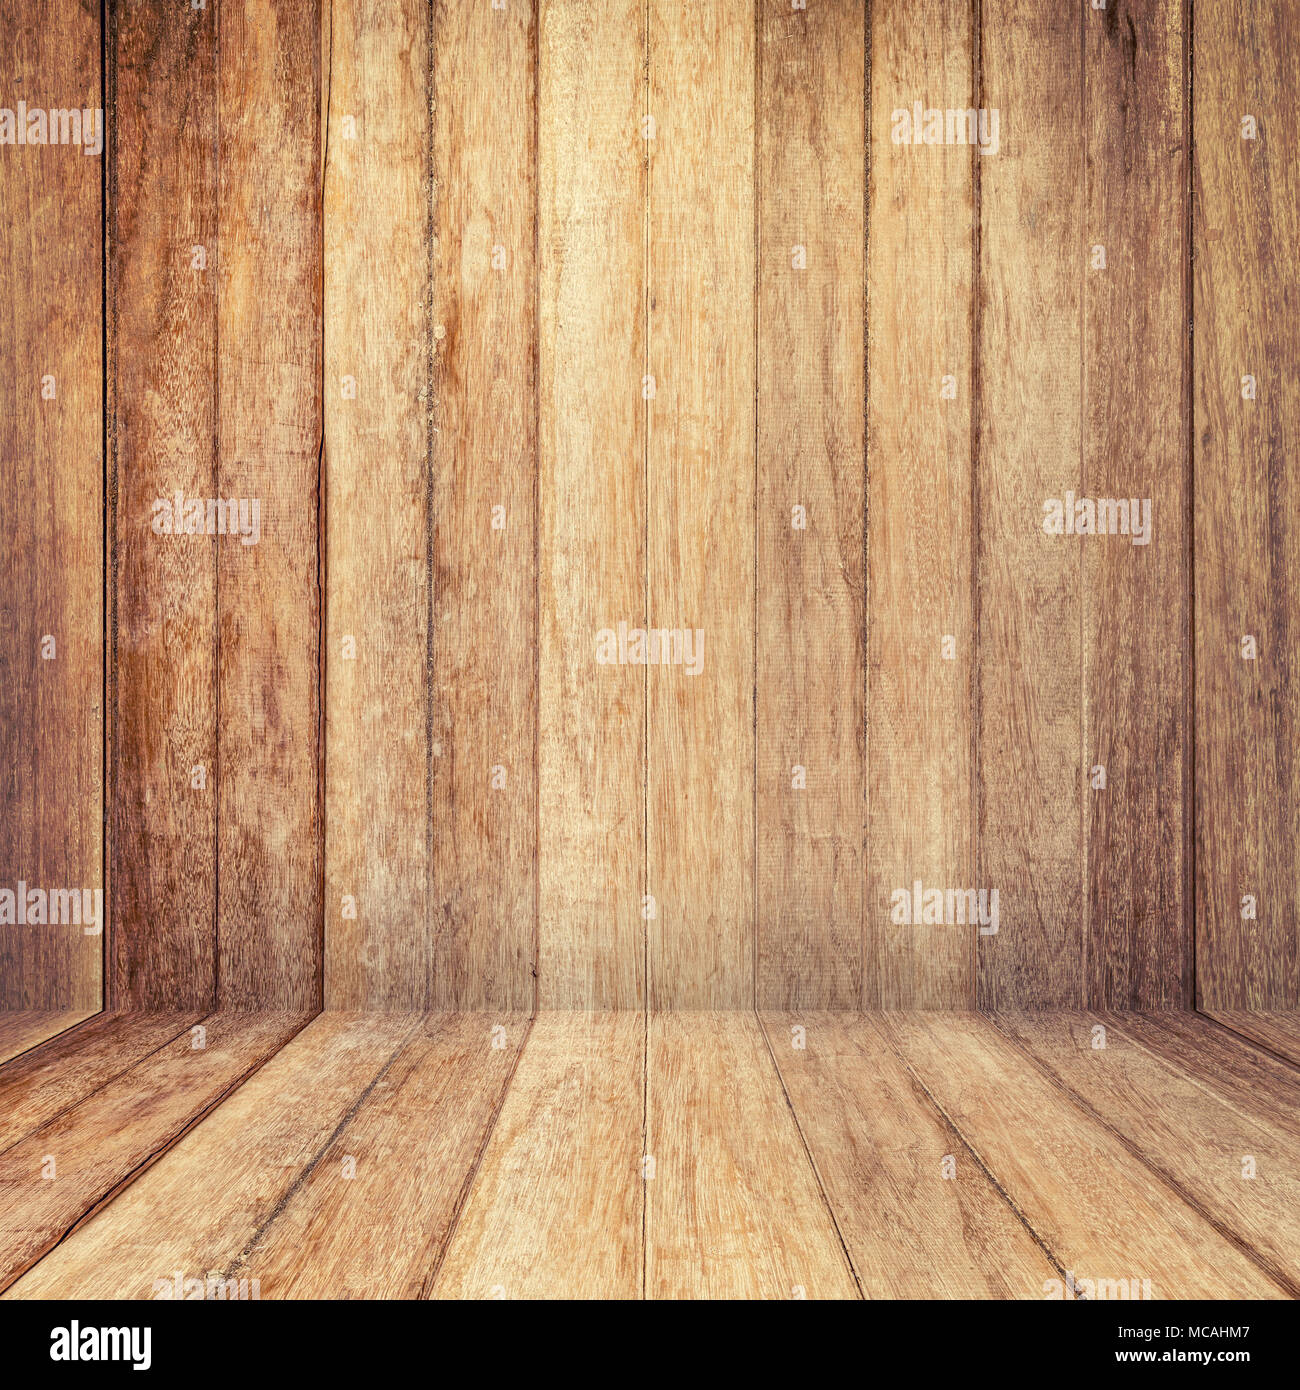 Wood texture background. old wood wall and floor perspective for background. Stock Photo